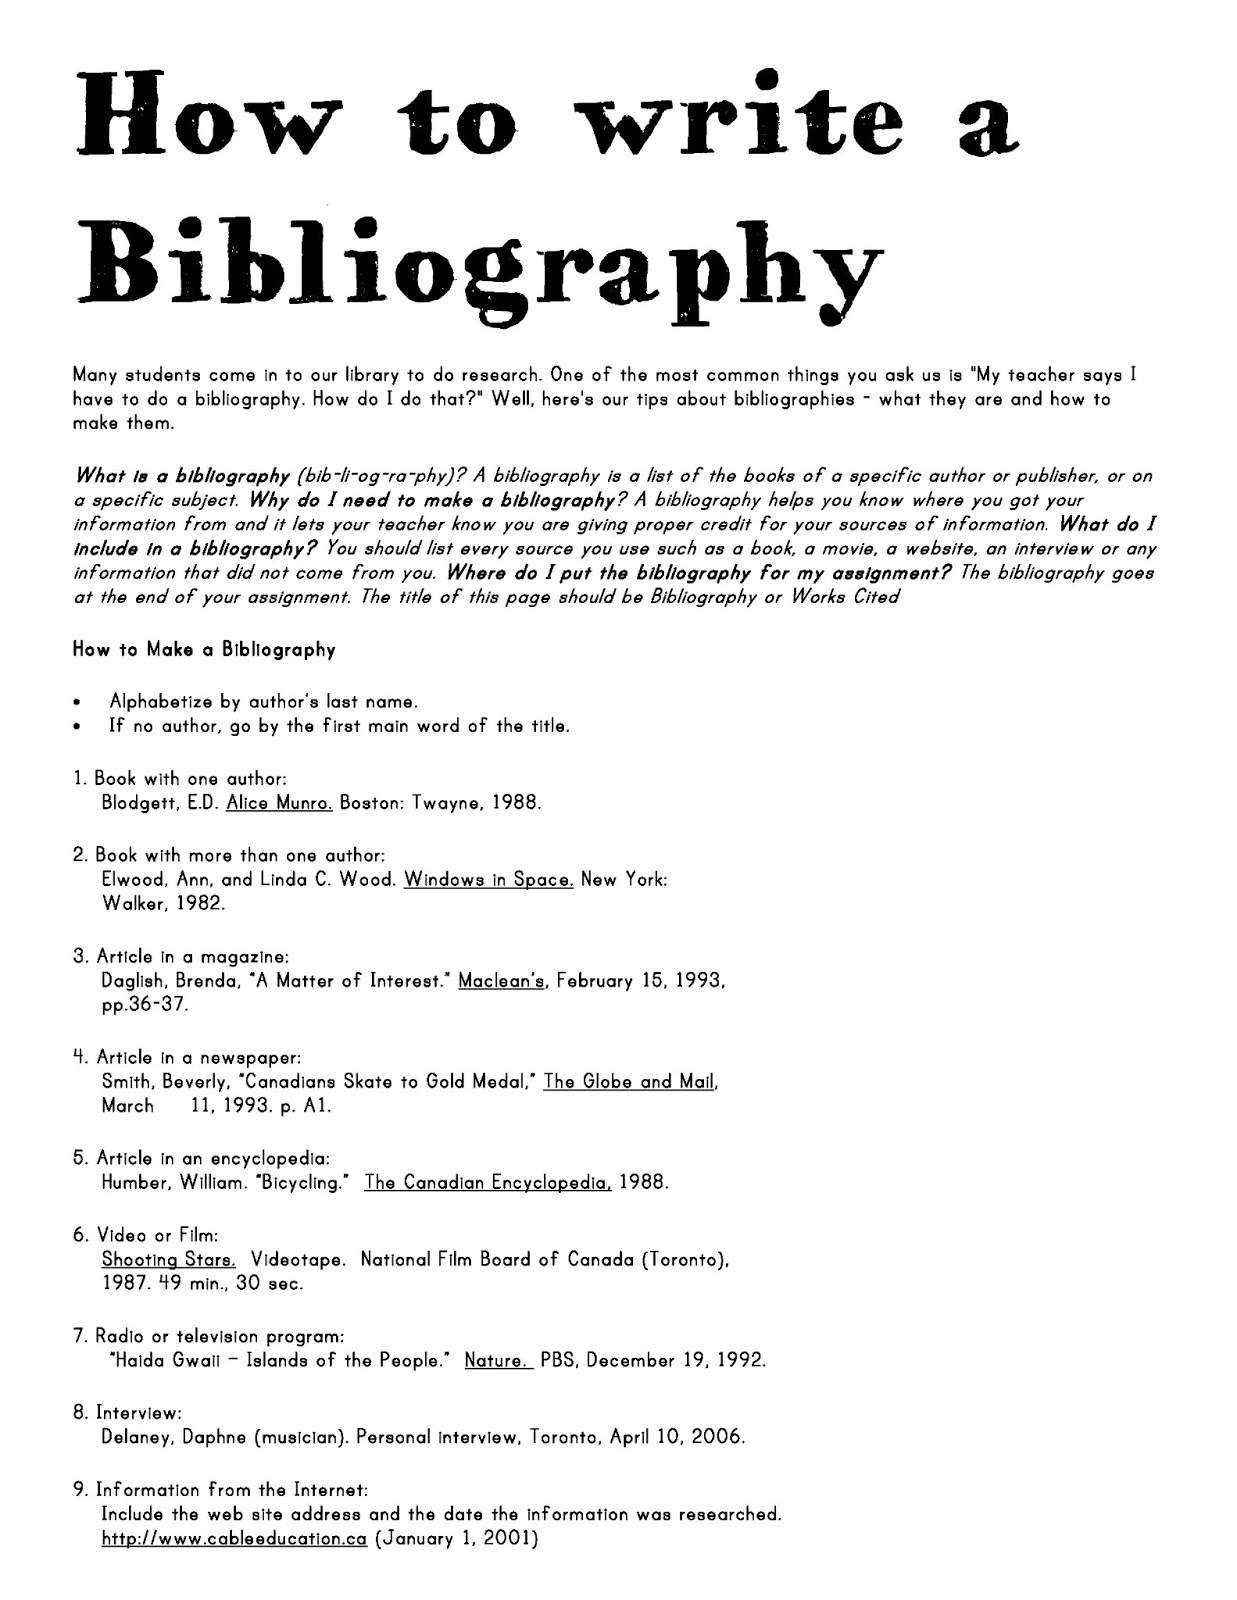 How to write a bibliography for a speech